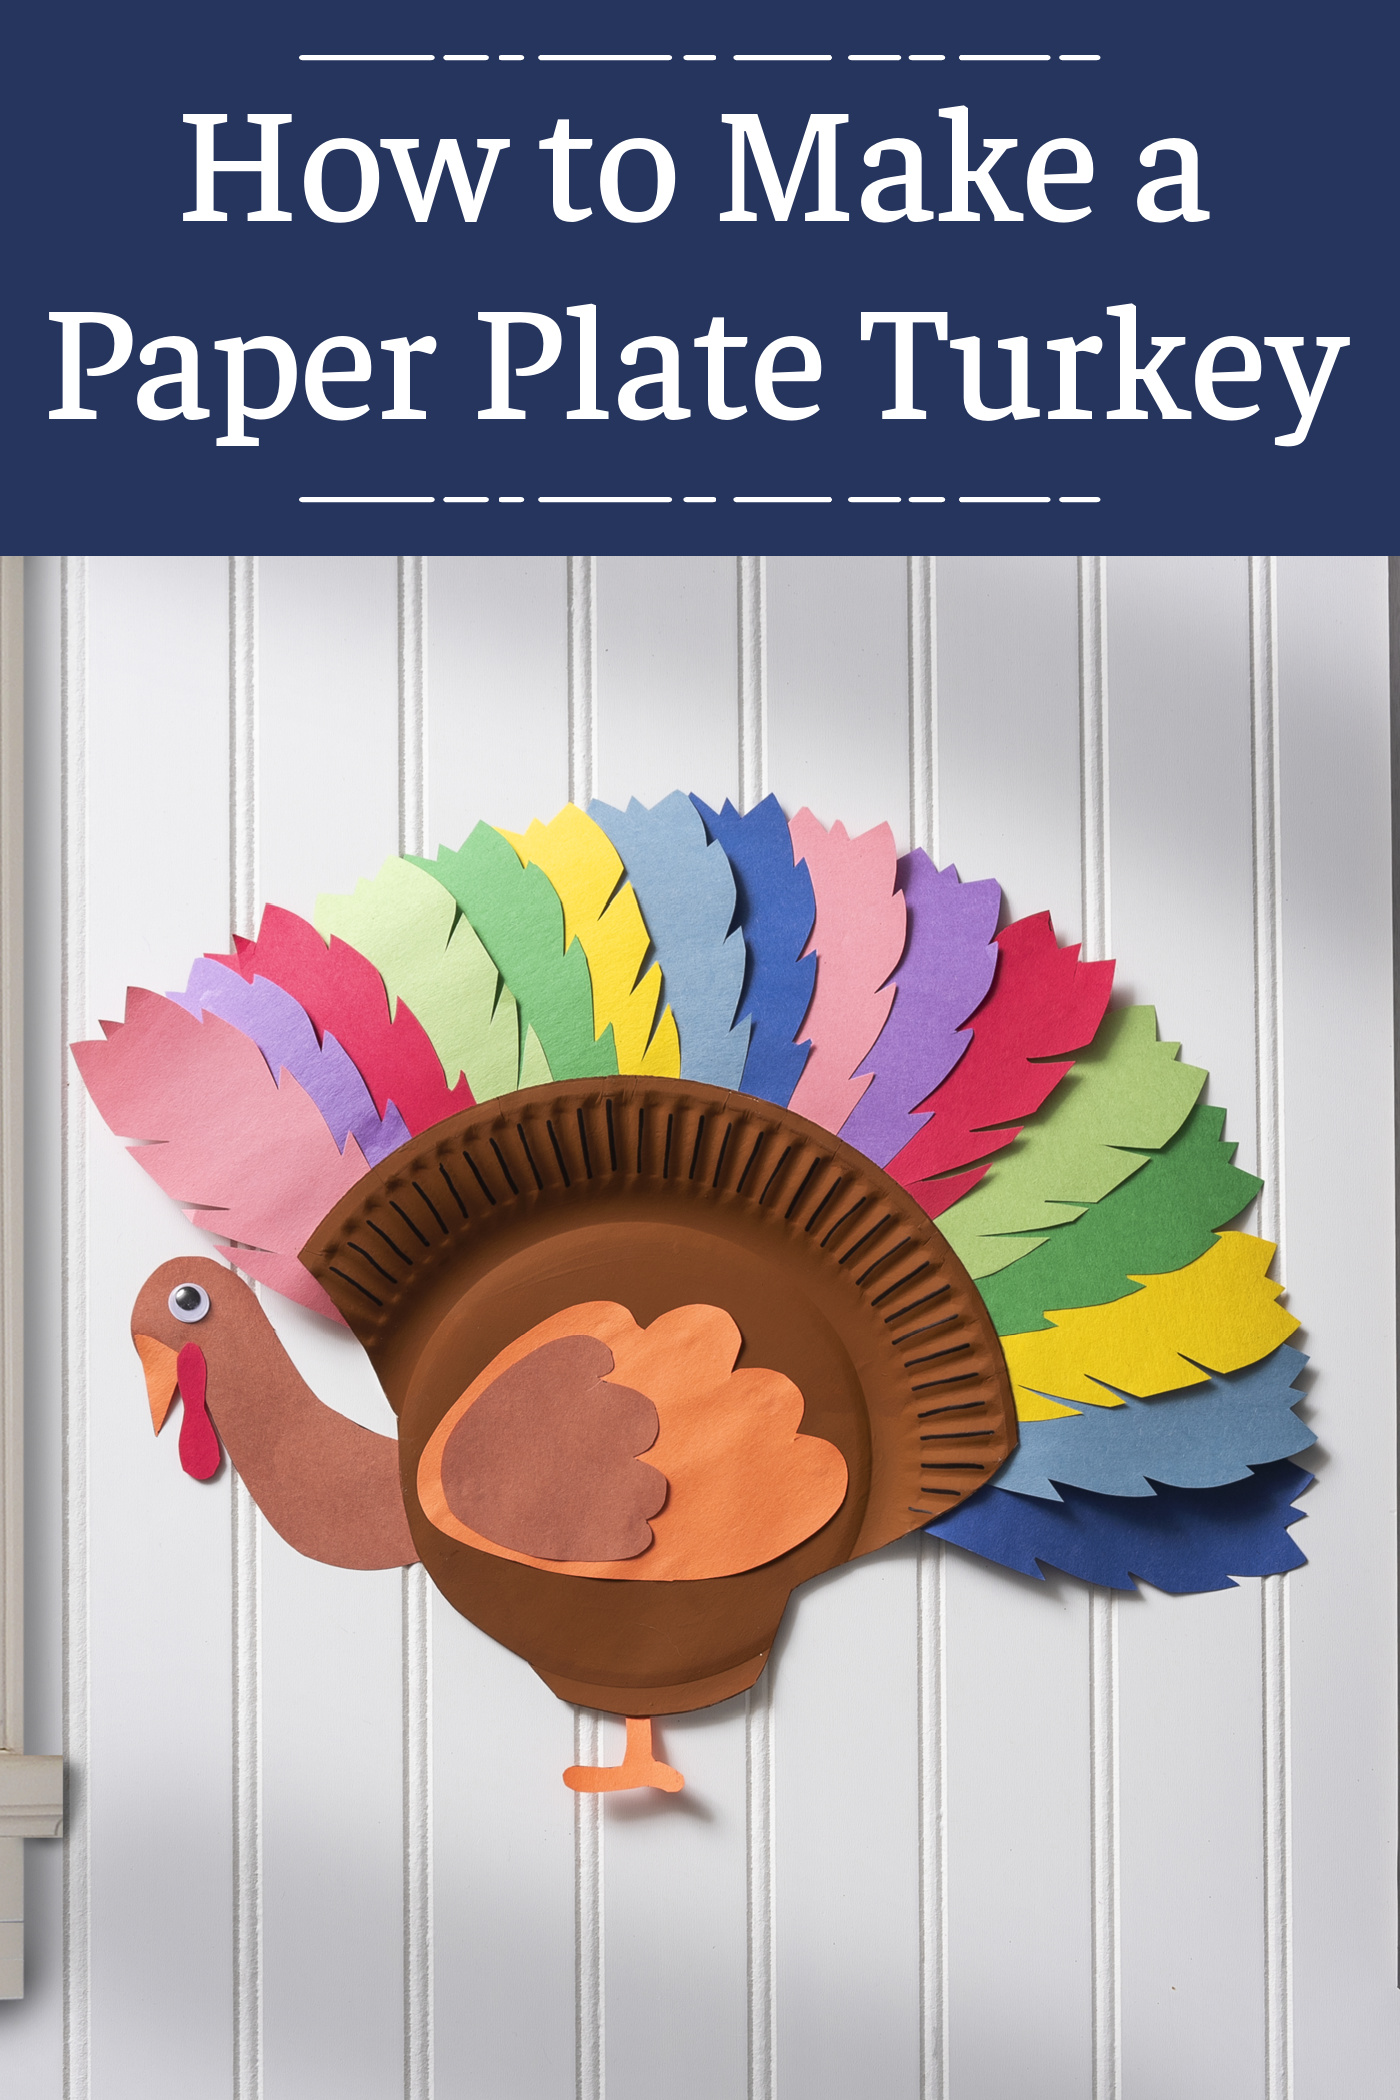 How to Make a Paper Plate Turkey